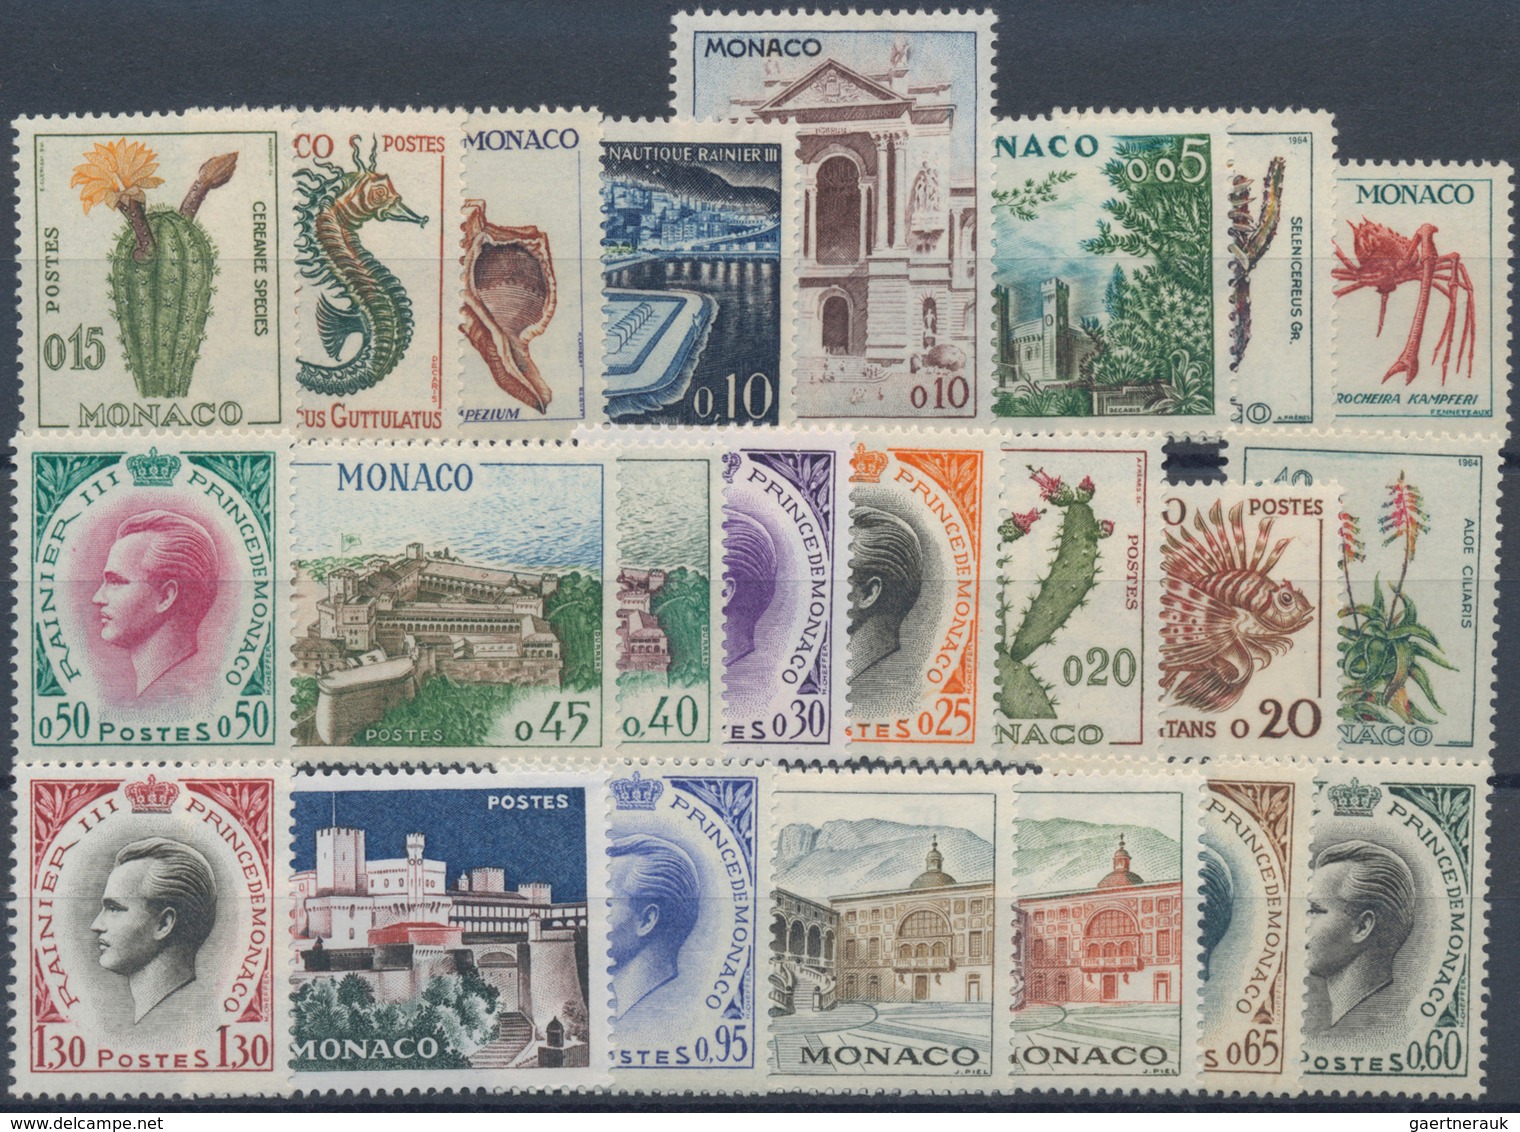 Monaco: 1960/1989, dealer's stock of year sets on stockcards, seald in plastic sleeves with 25 sets